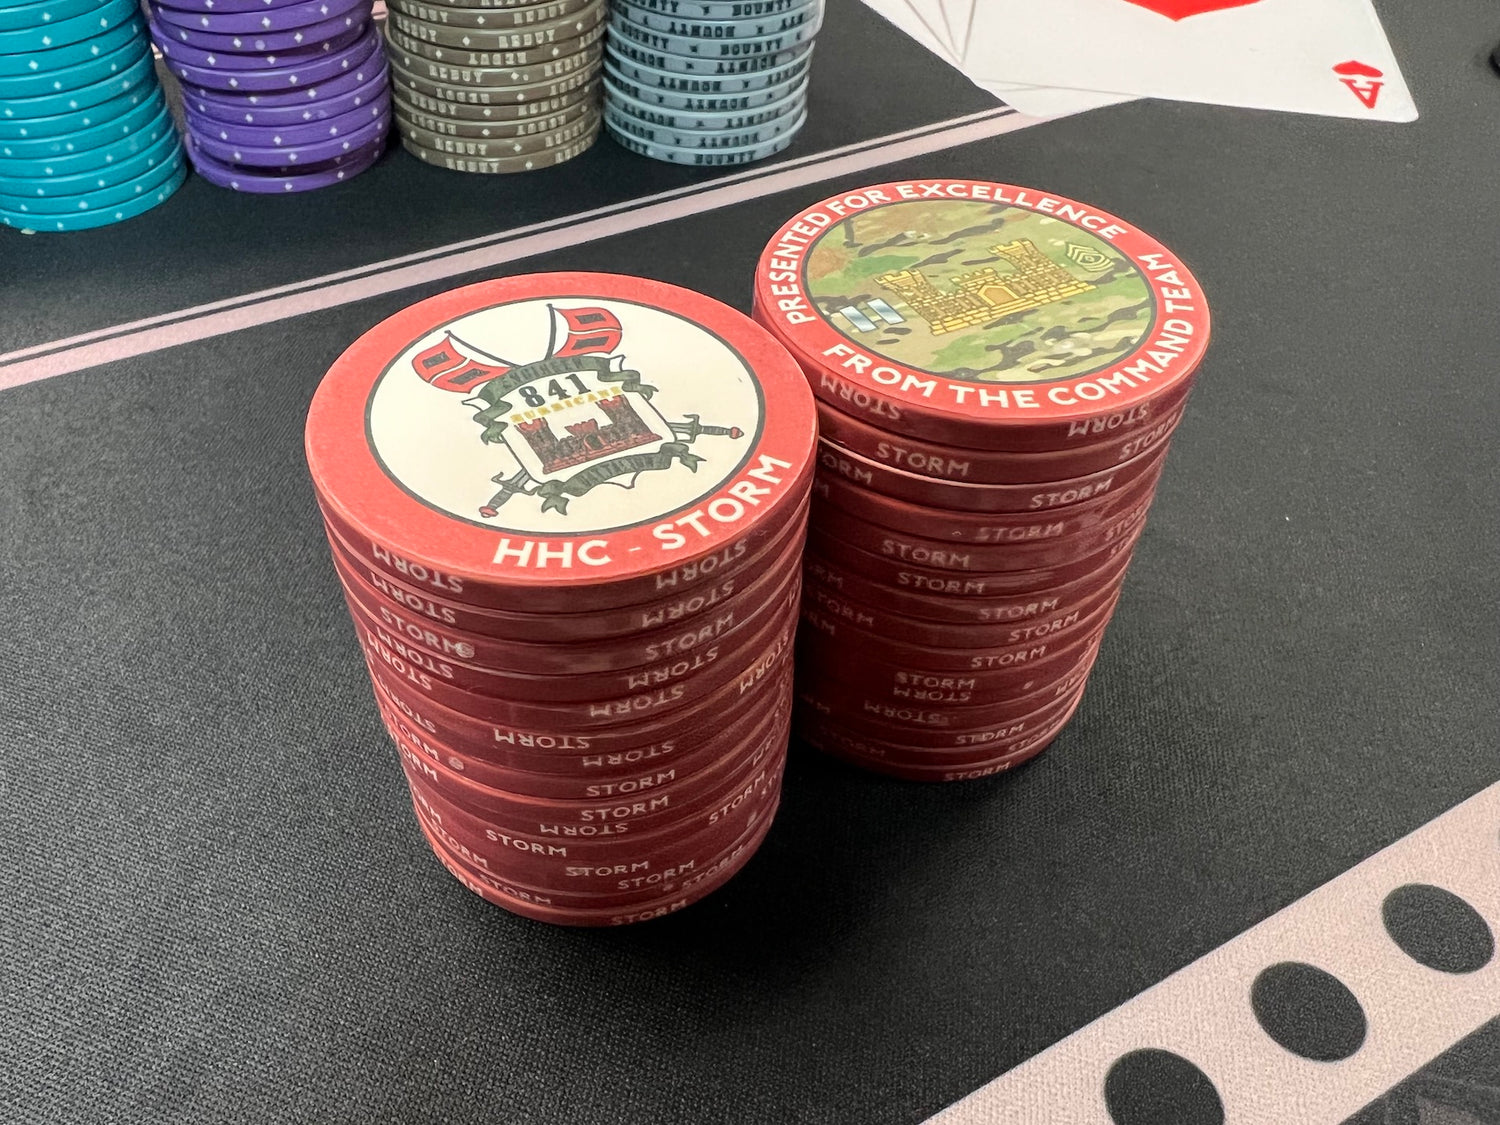 Aurora Poker Gear's custom poker chips are available in 39mm, 43mm, 47mm, 49mm, and 60mm. Every surface of our chips is 100% customizable. We can print personalized graphics on both the faces and on the edges of these ceramic casino-quality poker checks.